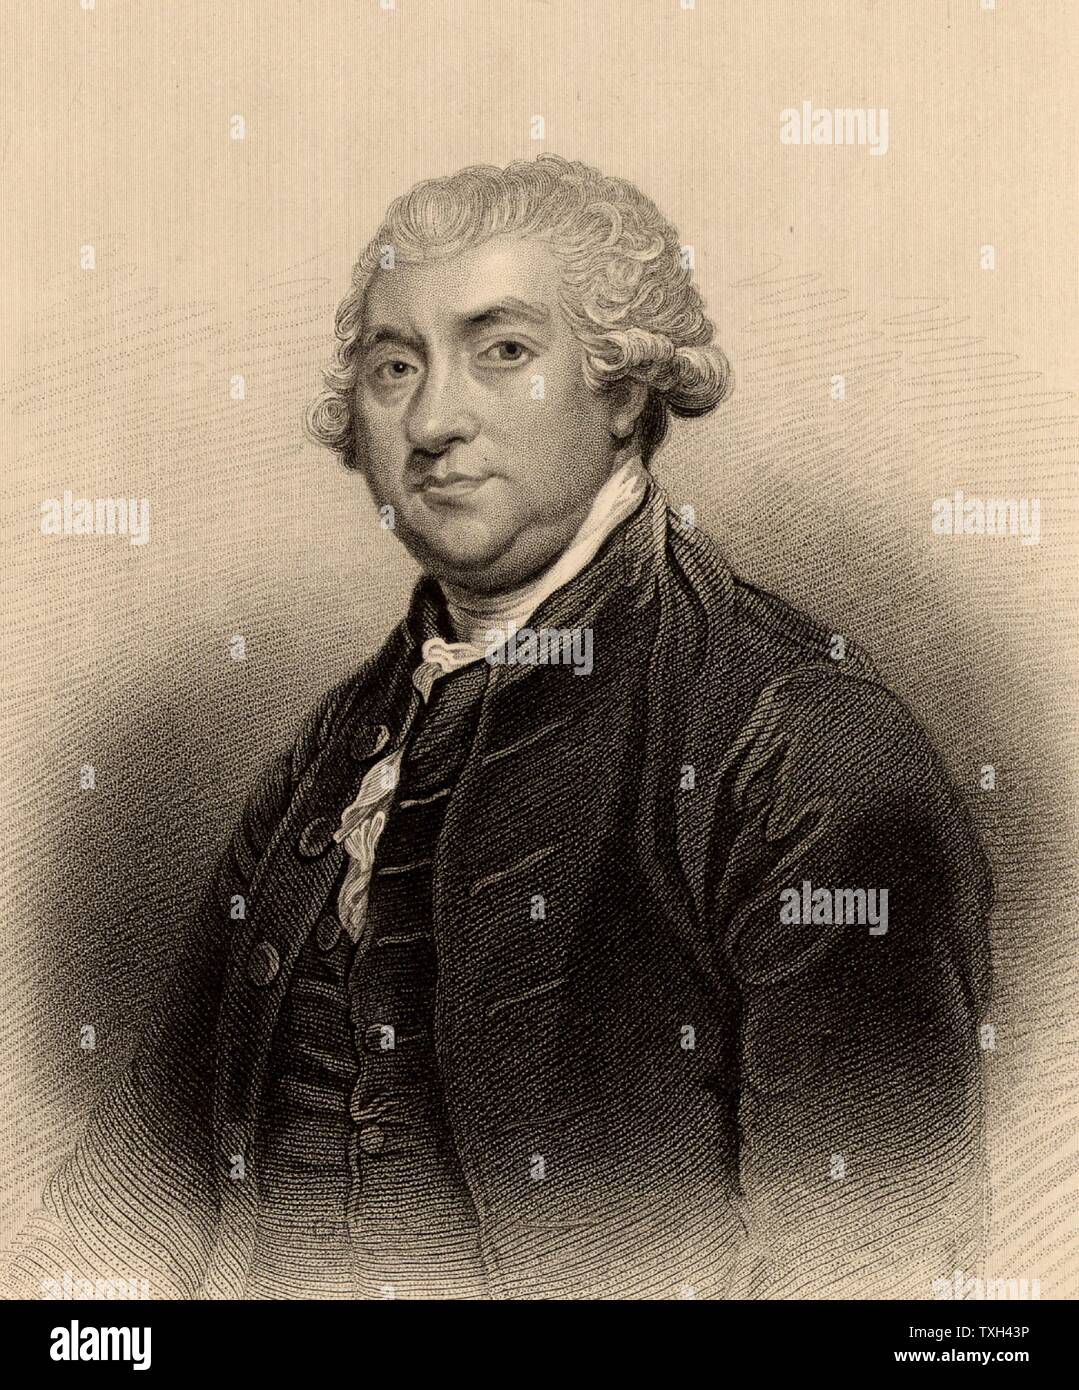 James Boswell (1740-1795) Scottish diarist, man-of-letters and biographer of Dr Samuel Johnson (1709-1784). Engraving after the portrait by Joshua Reynolds from  'A Biographical Dictionary of Eminent Scotsmen' by Thomas Thomson (1870). Stock Photo